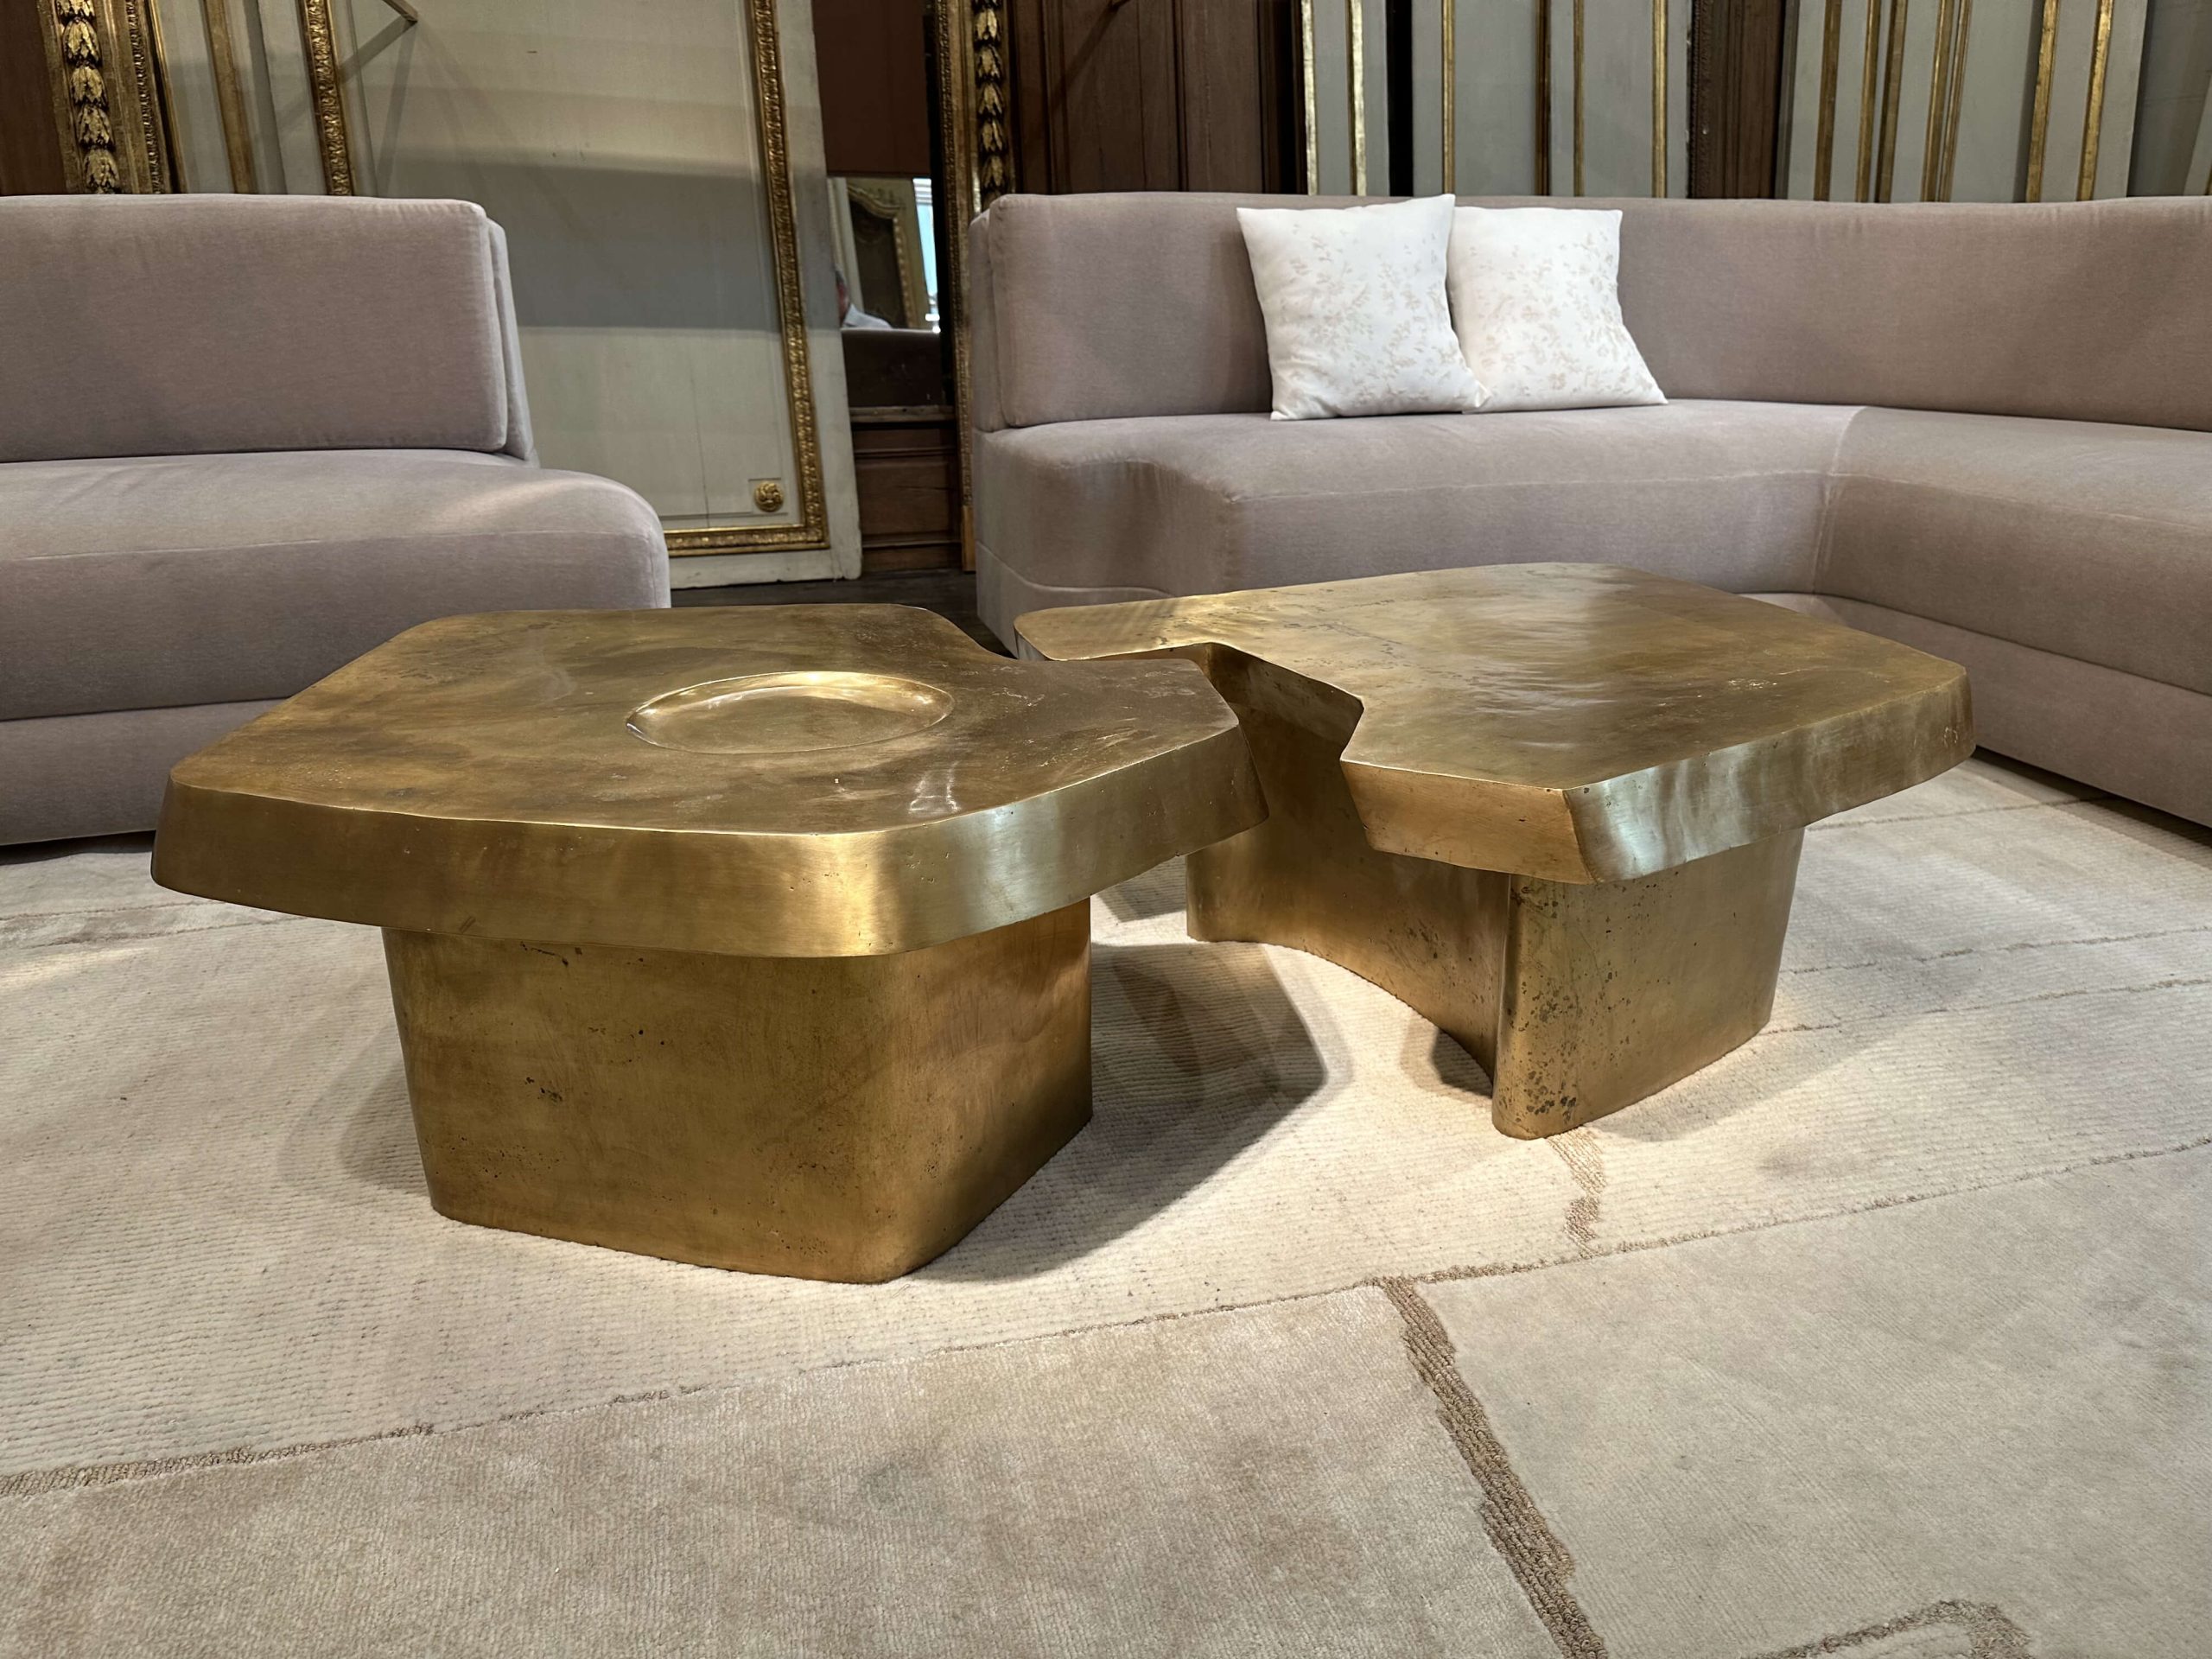 Coffee table available from FEAU&CIE; photo by David Charette